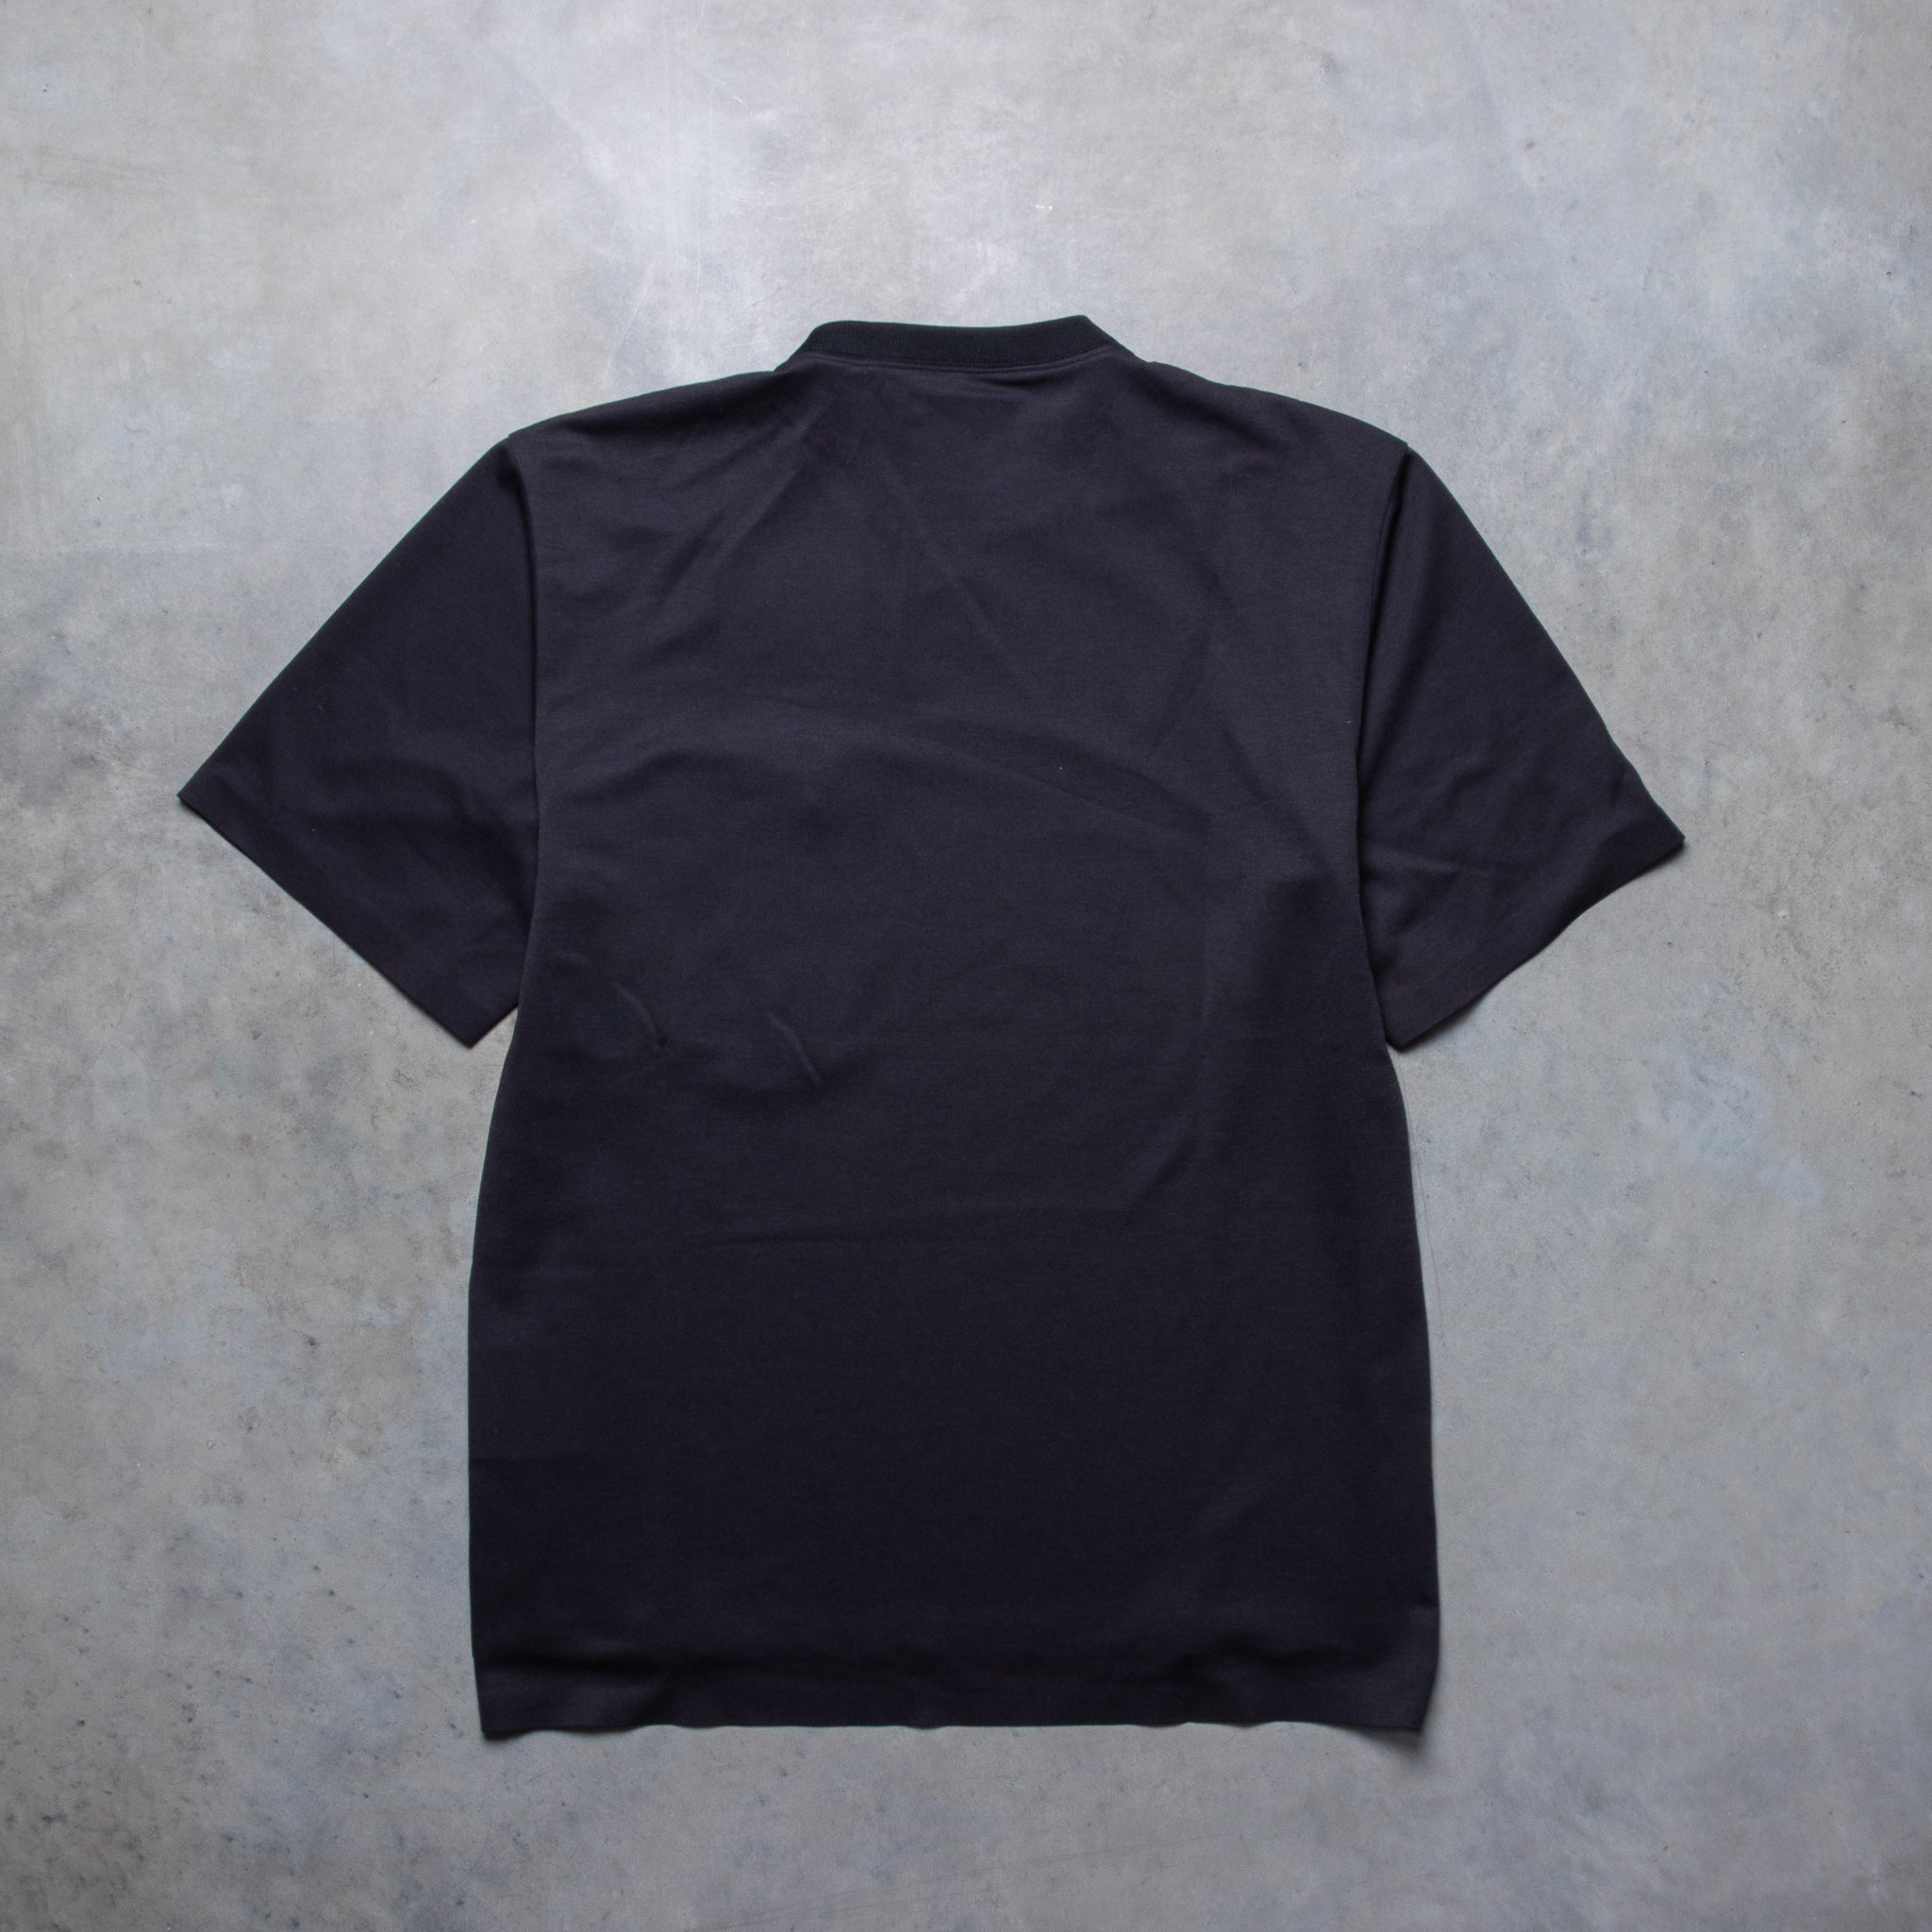 And Wander Seamless SS T Black